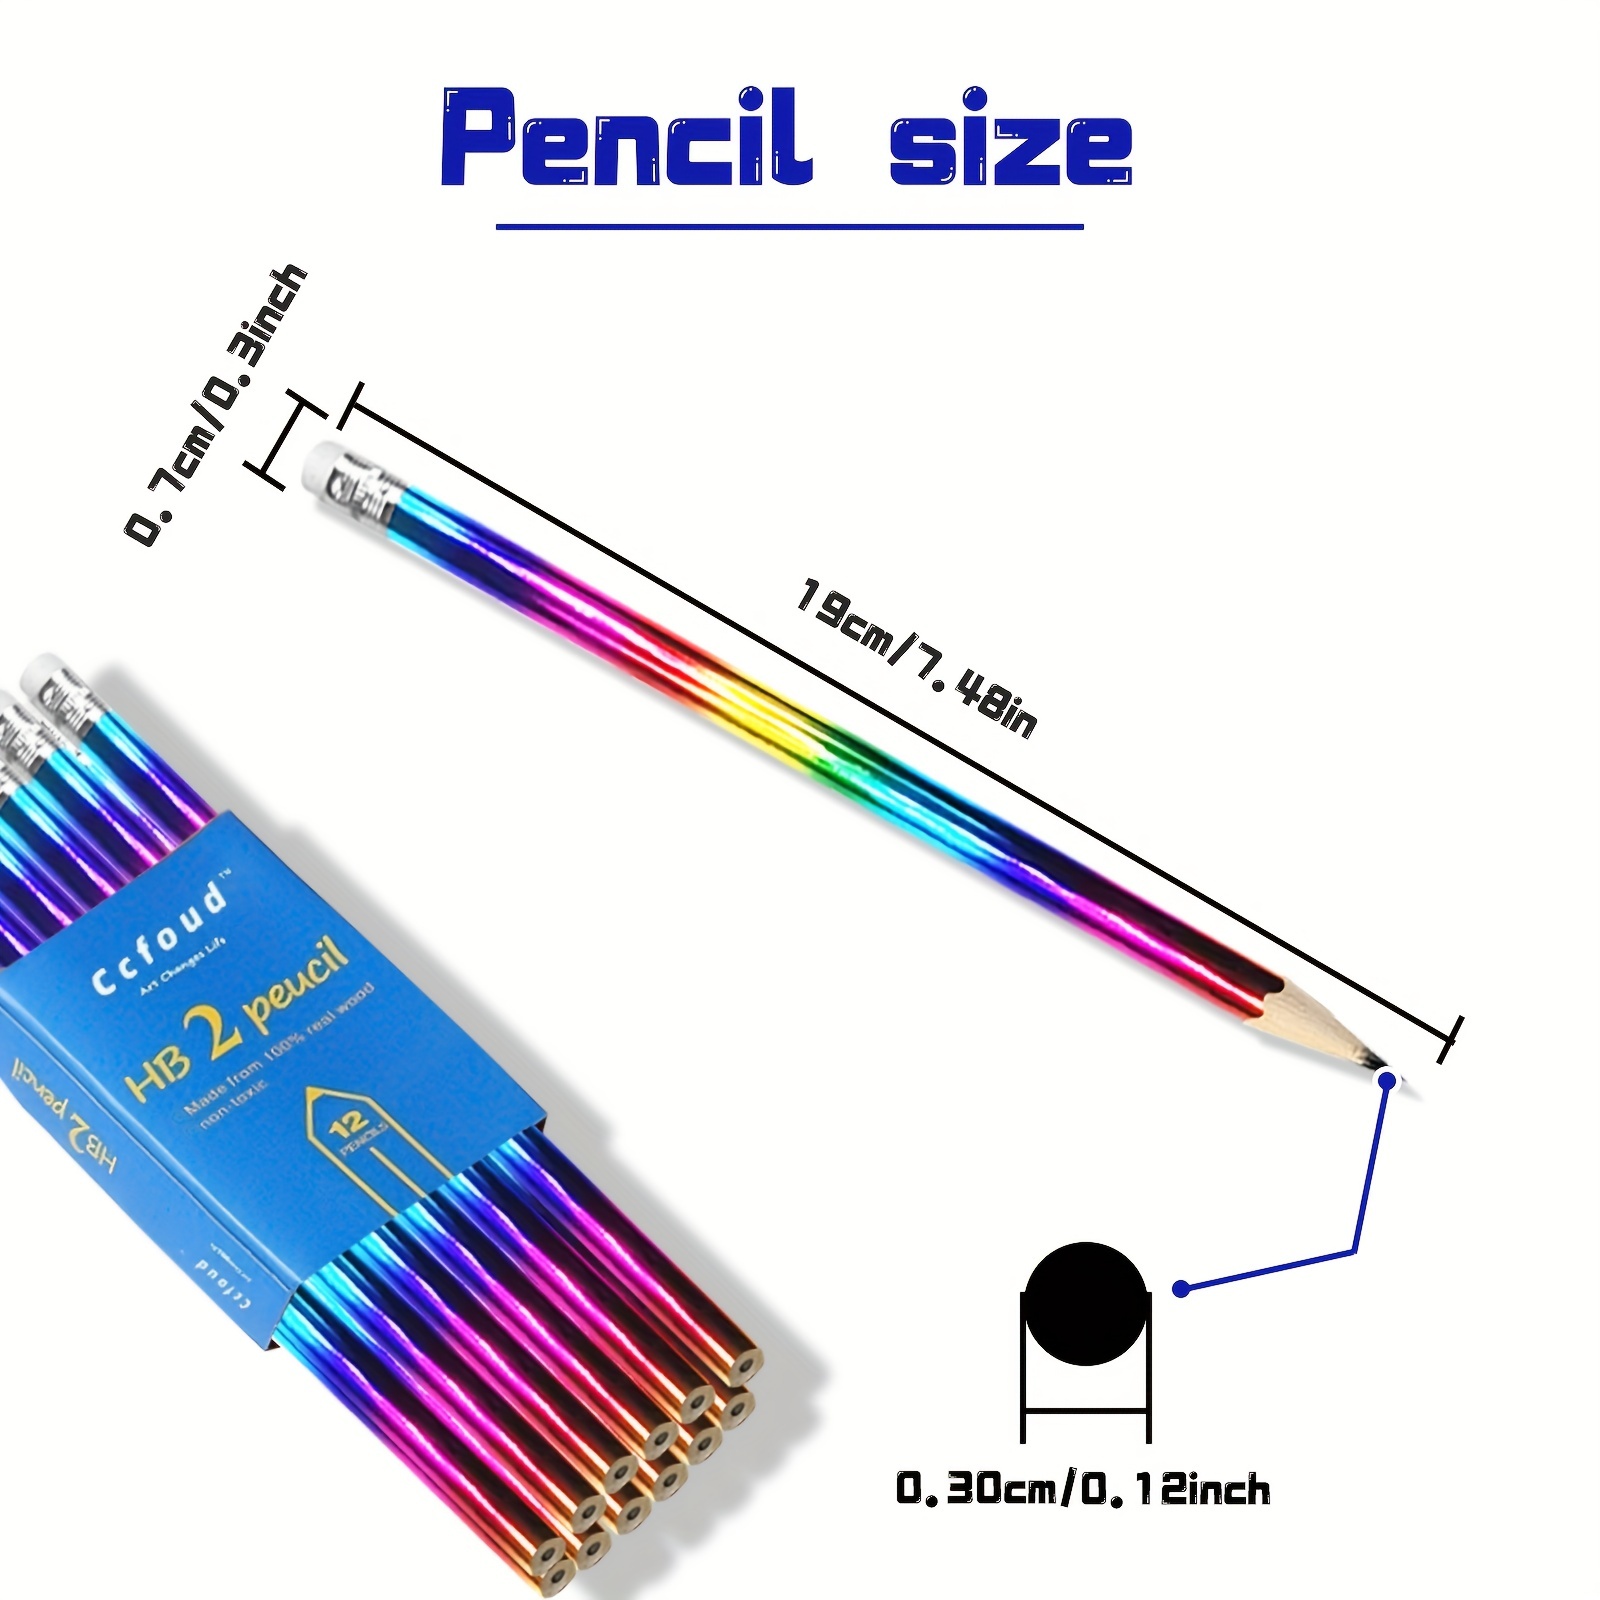 Rainbow Color Pencils for Kids Colorful Wood Pencils Rainbow Pencils Bright  Tie Dye Round Pencils with Eraser Top Pencils Fun Pencils for Kids Home